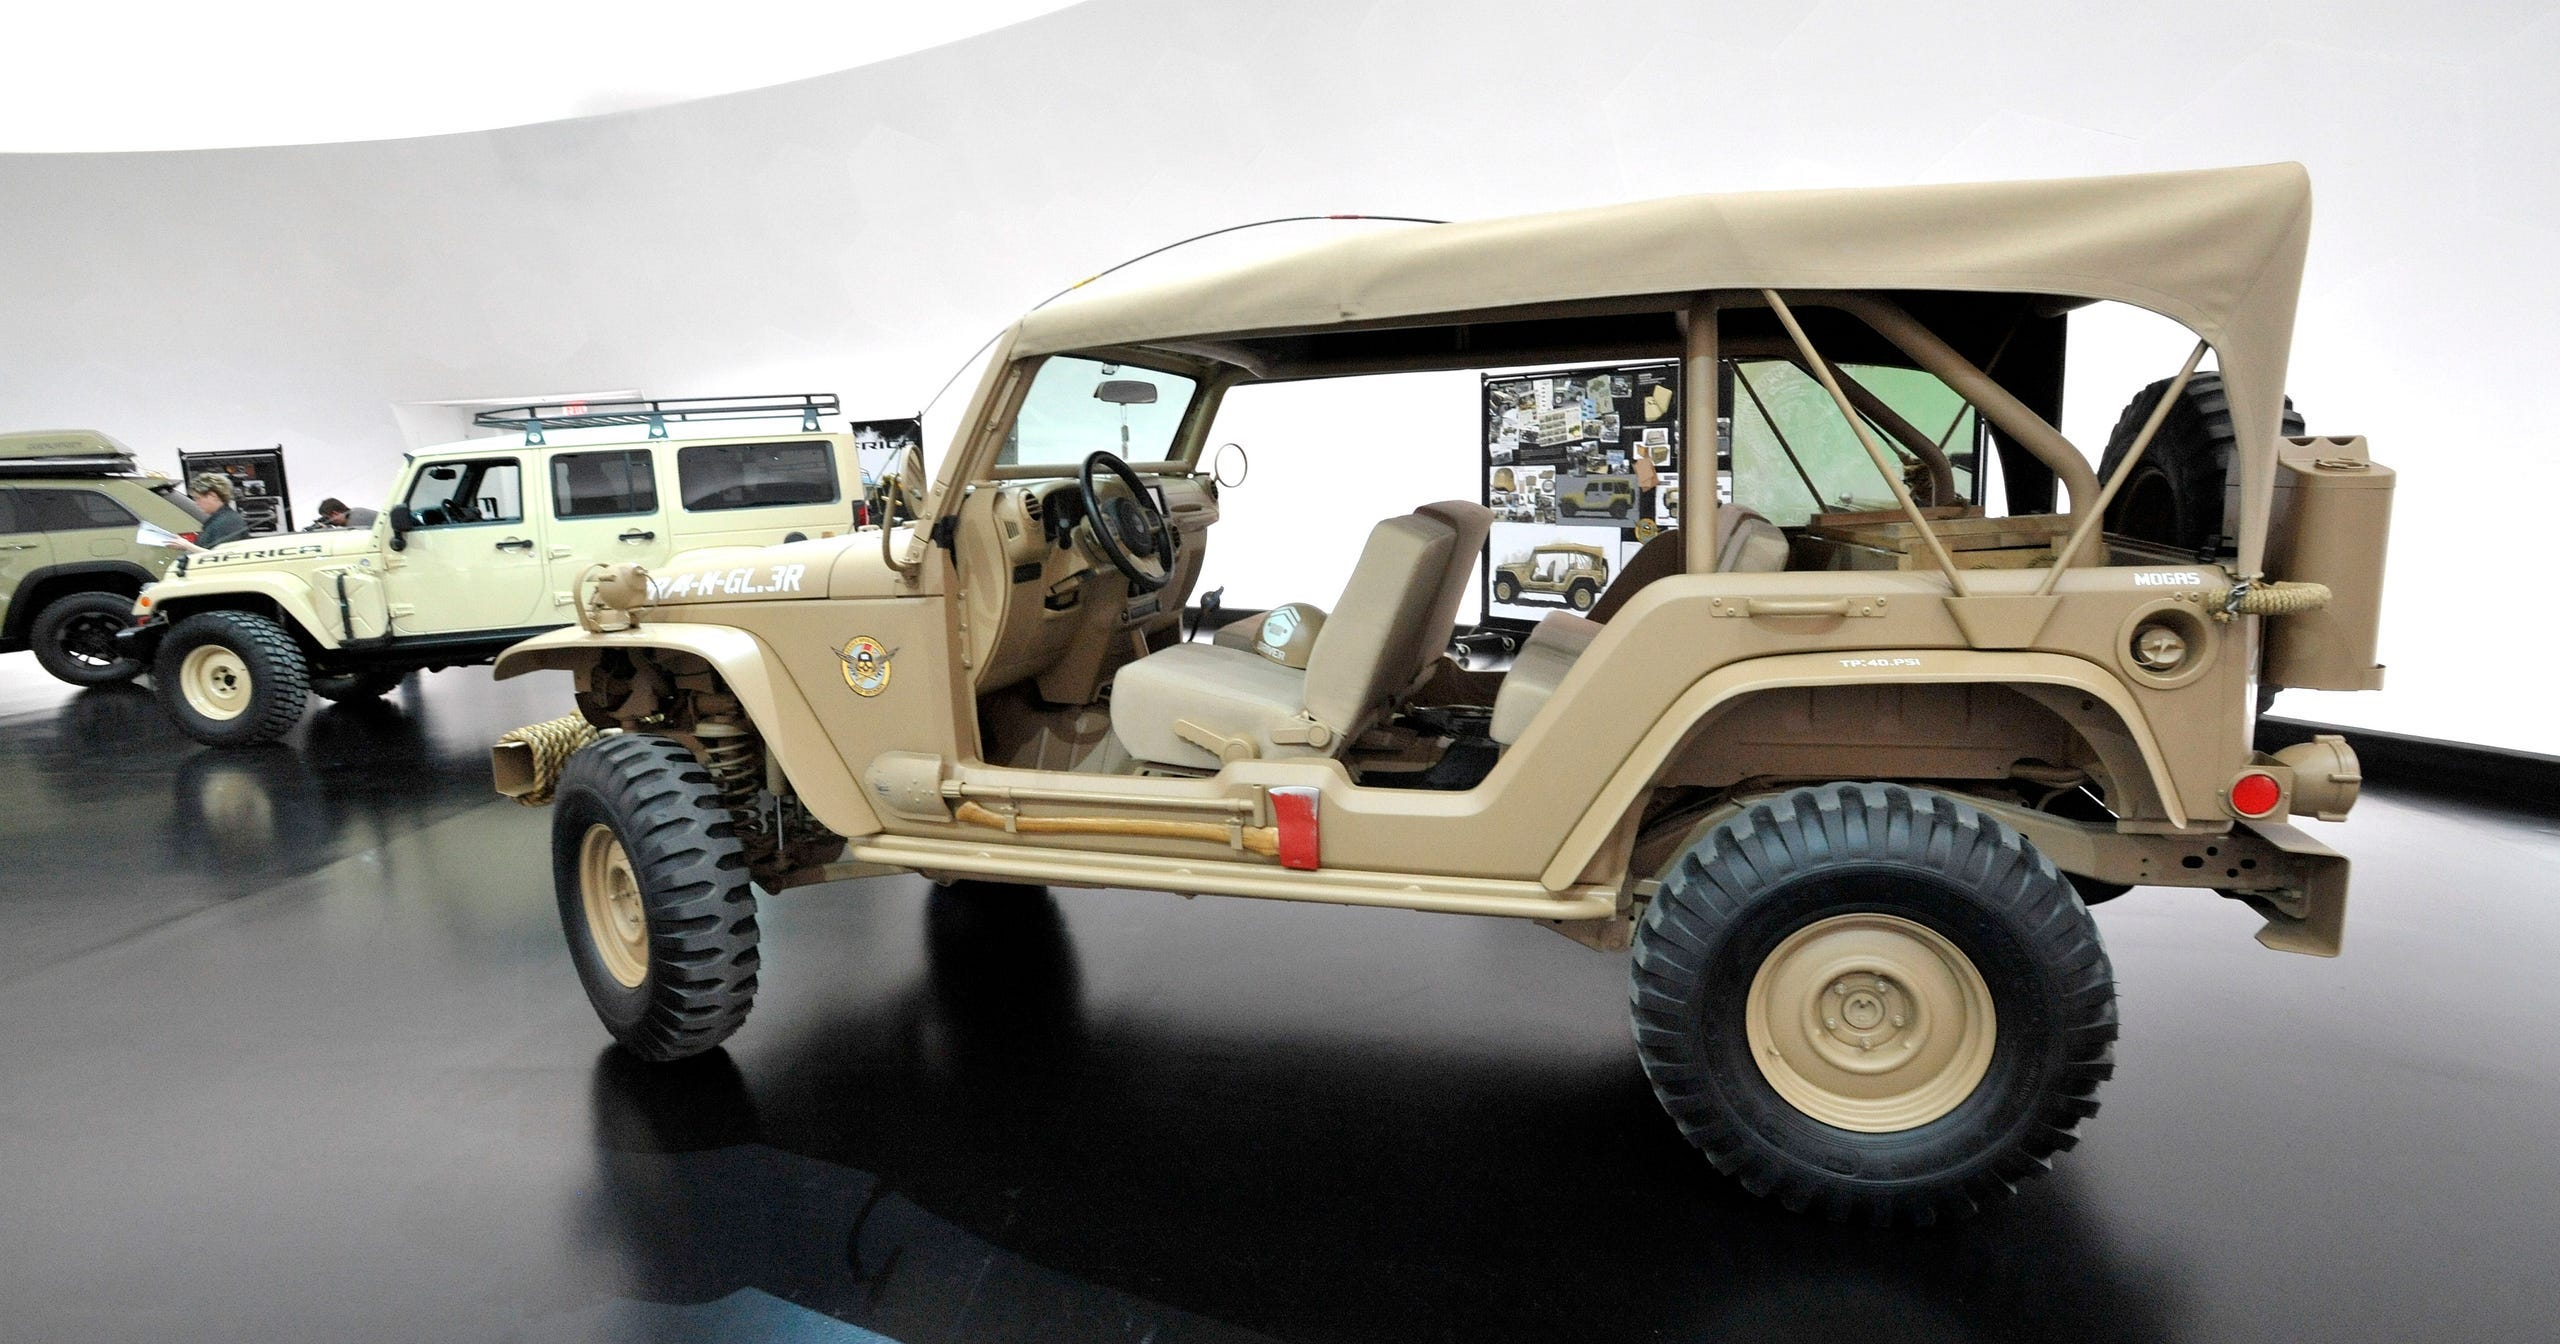 The Jeep Staff Car, one of seven Jeep concept vehicles built with Mopar and Jeep Performance Parts, was unveiled on March 19, 2015, in preparation for the annual Easter Jeep Safari in Moab, Utah.